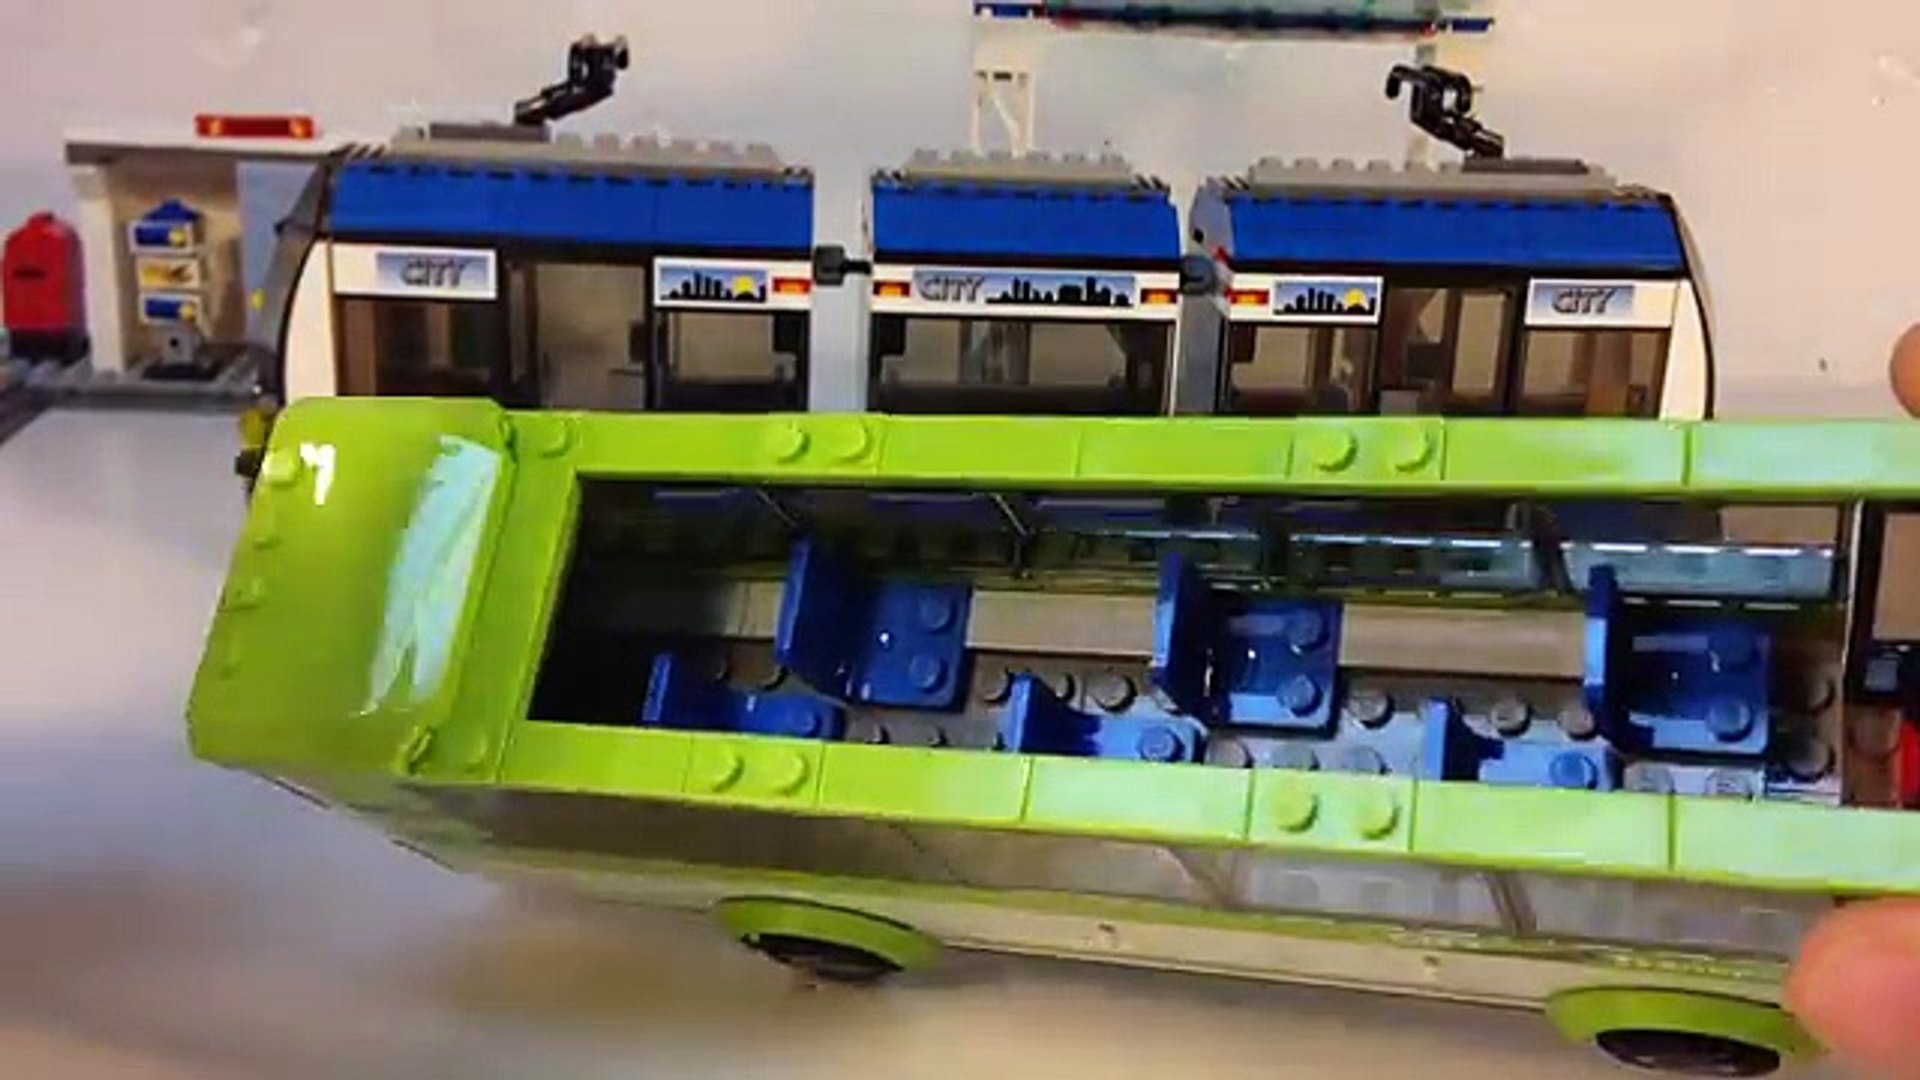 LEGO CITY 8404 Public Transport from new Train, Bus, Car, Street Sweeper -  video Dailymotion